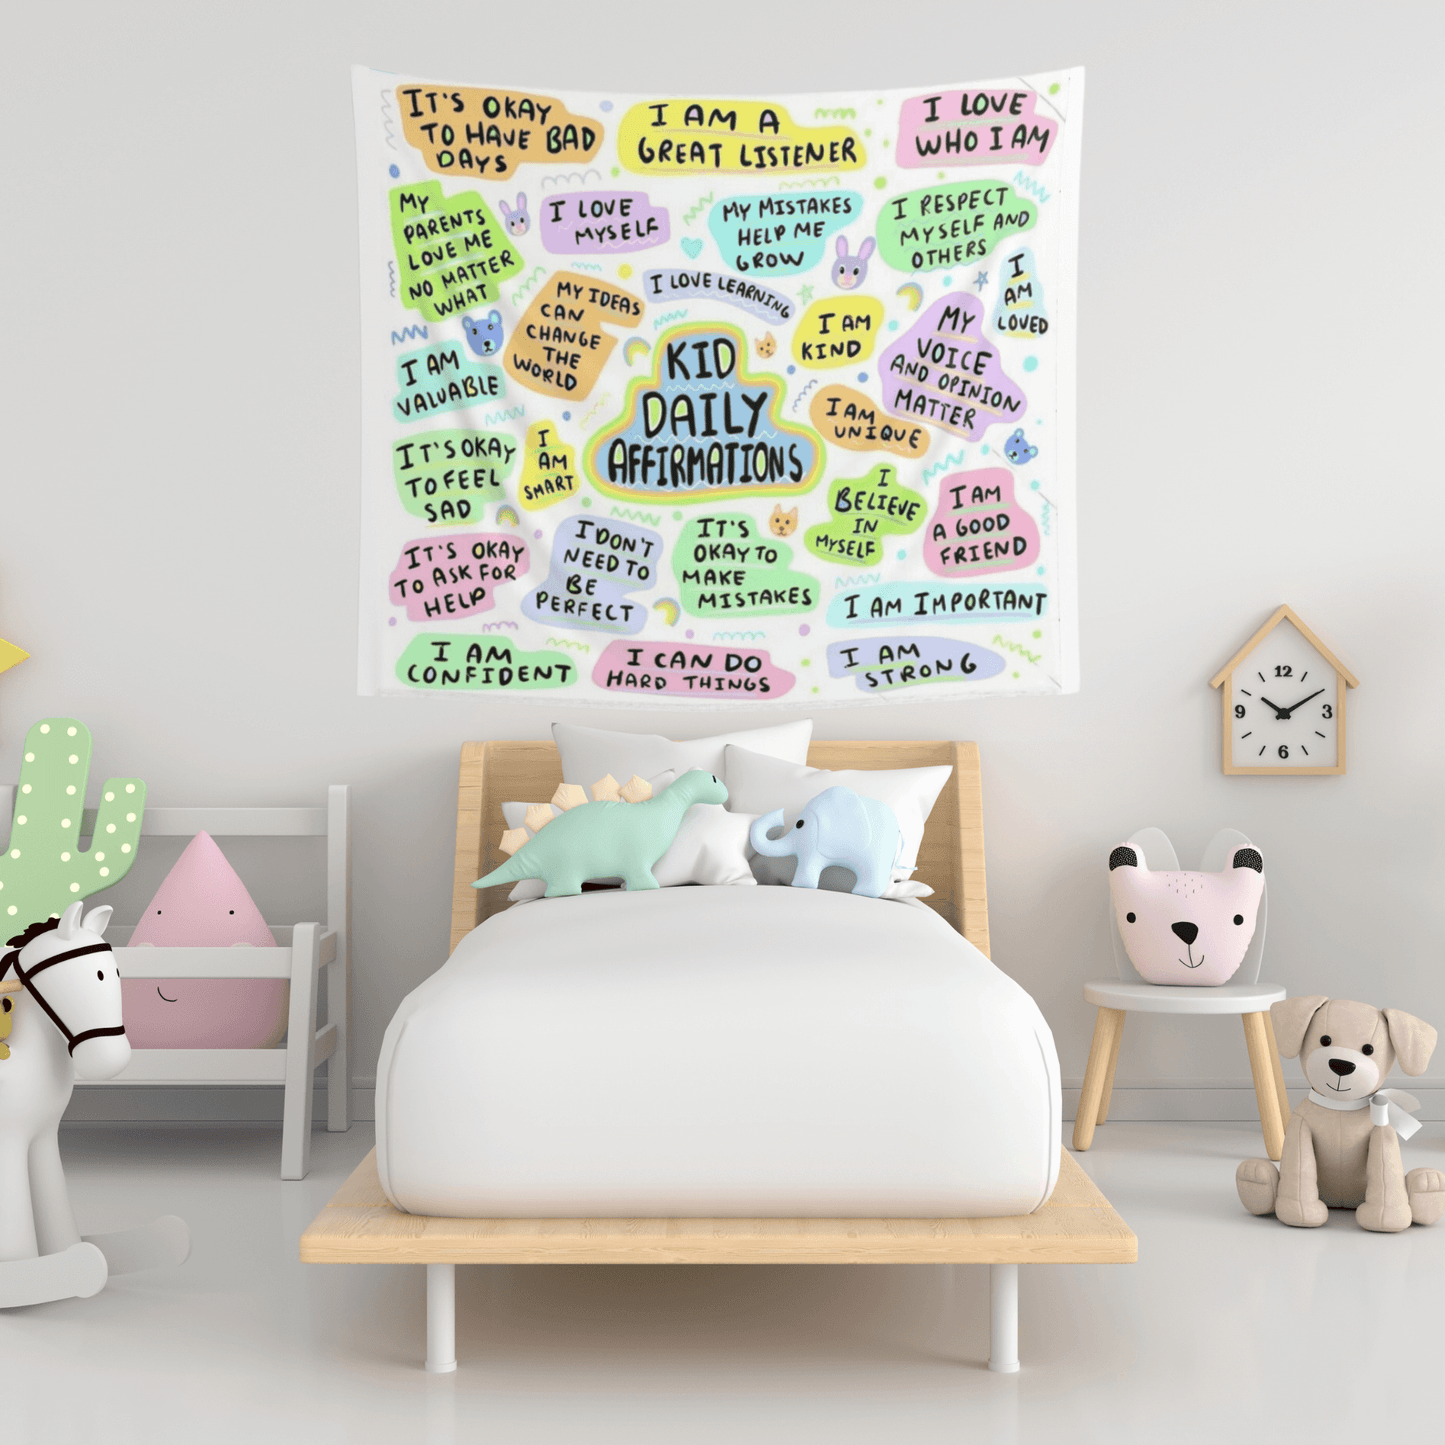 Kid Daily Affirmations Wall Hanging - Positive Wall Art Tapestry